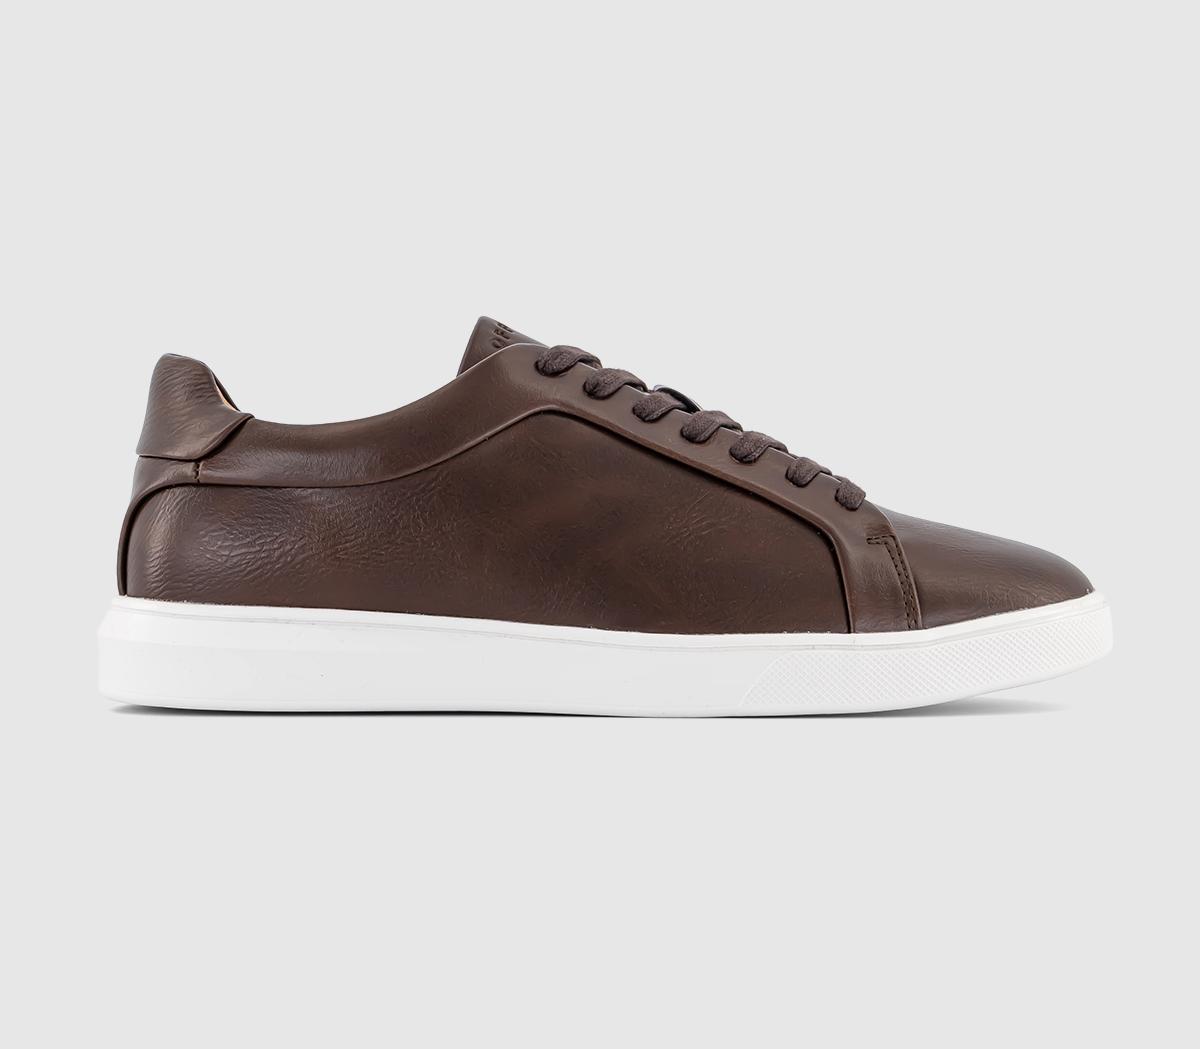 OFFICE Chepstow Lightweight Sneakers Brown - Men's Casual Shoes